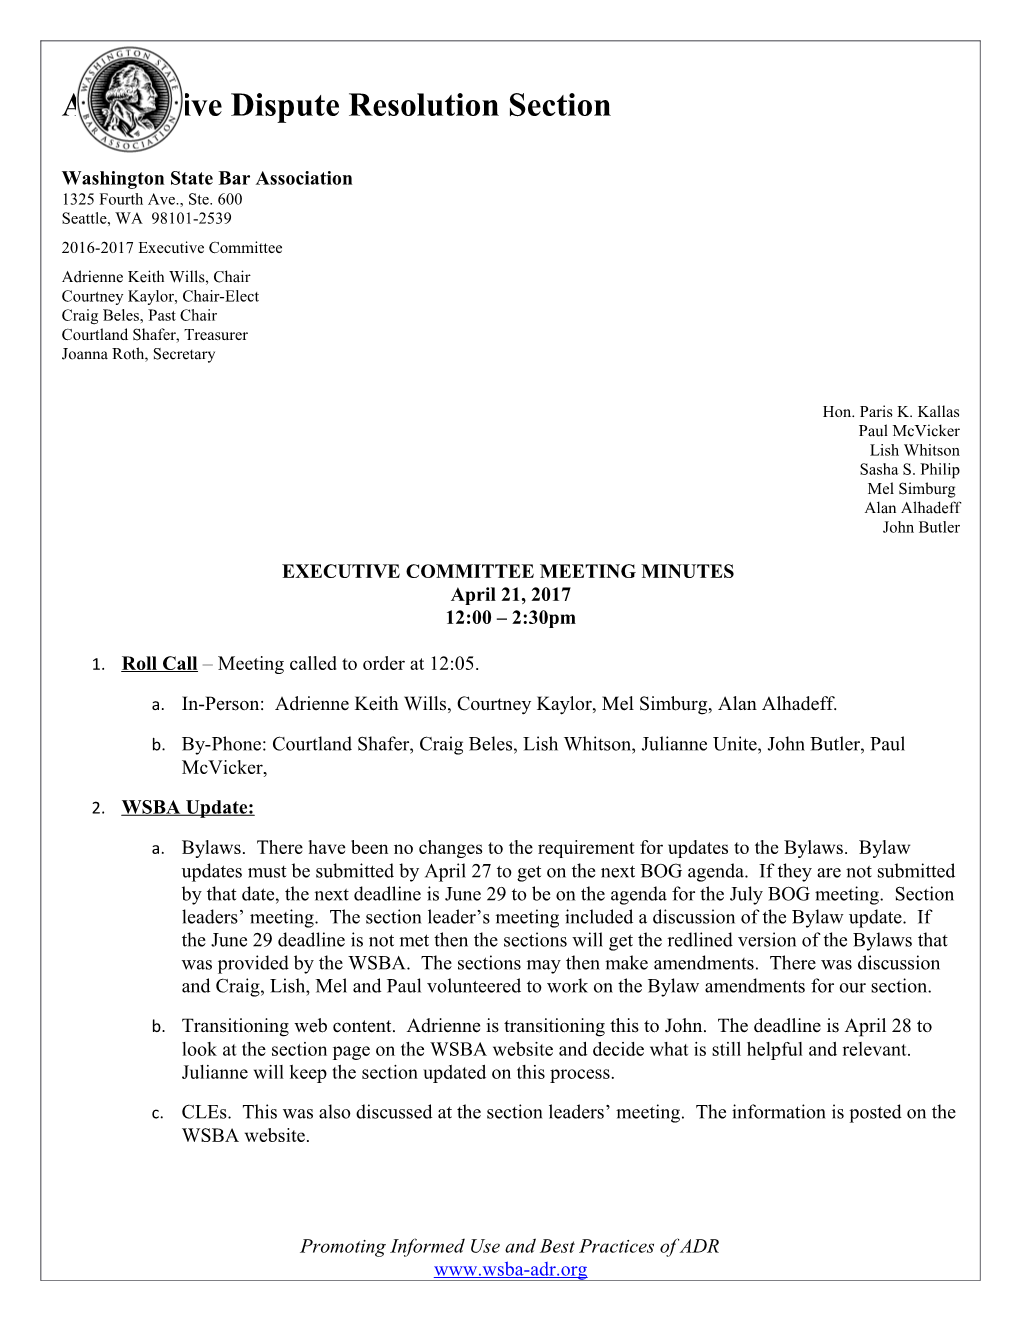 Executive Committee Meeting Minutes